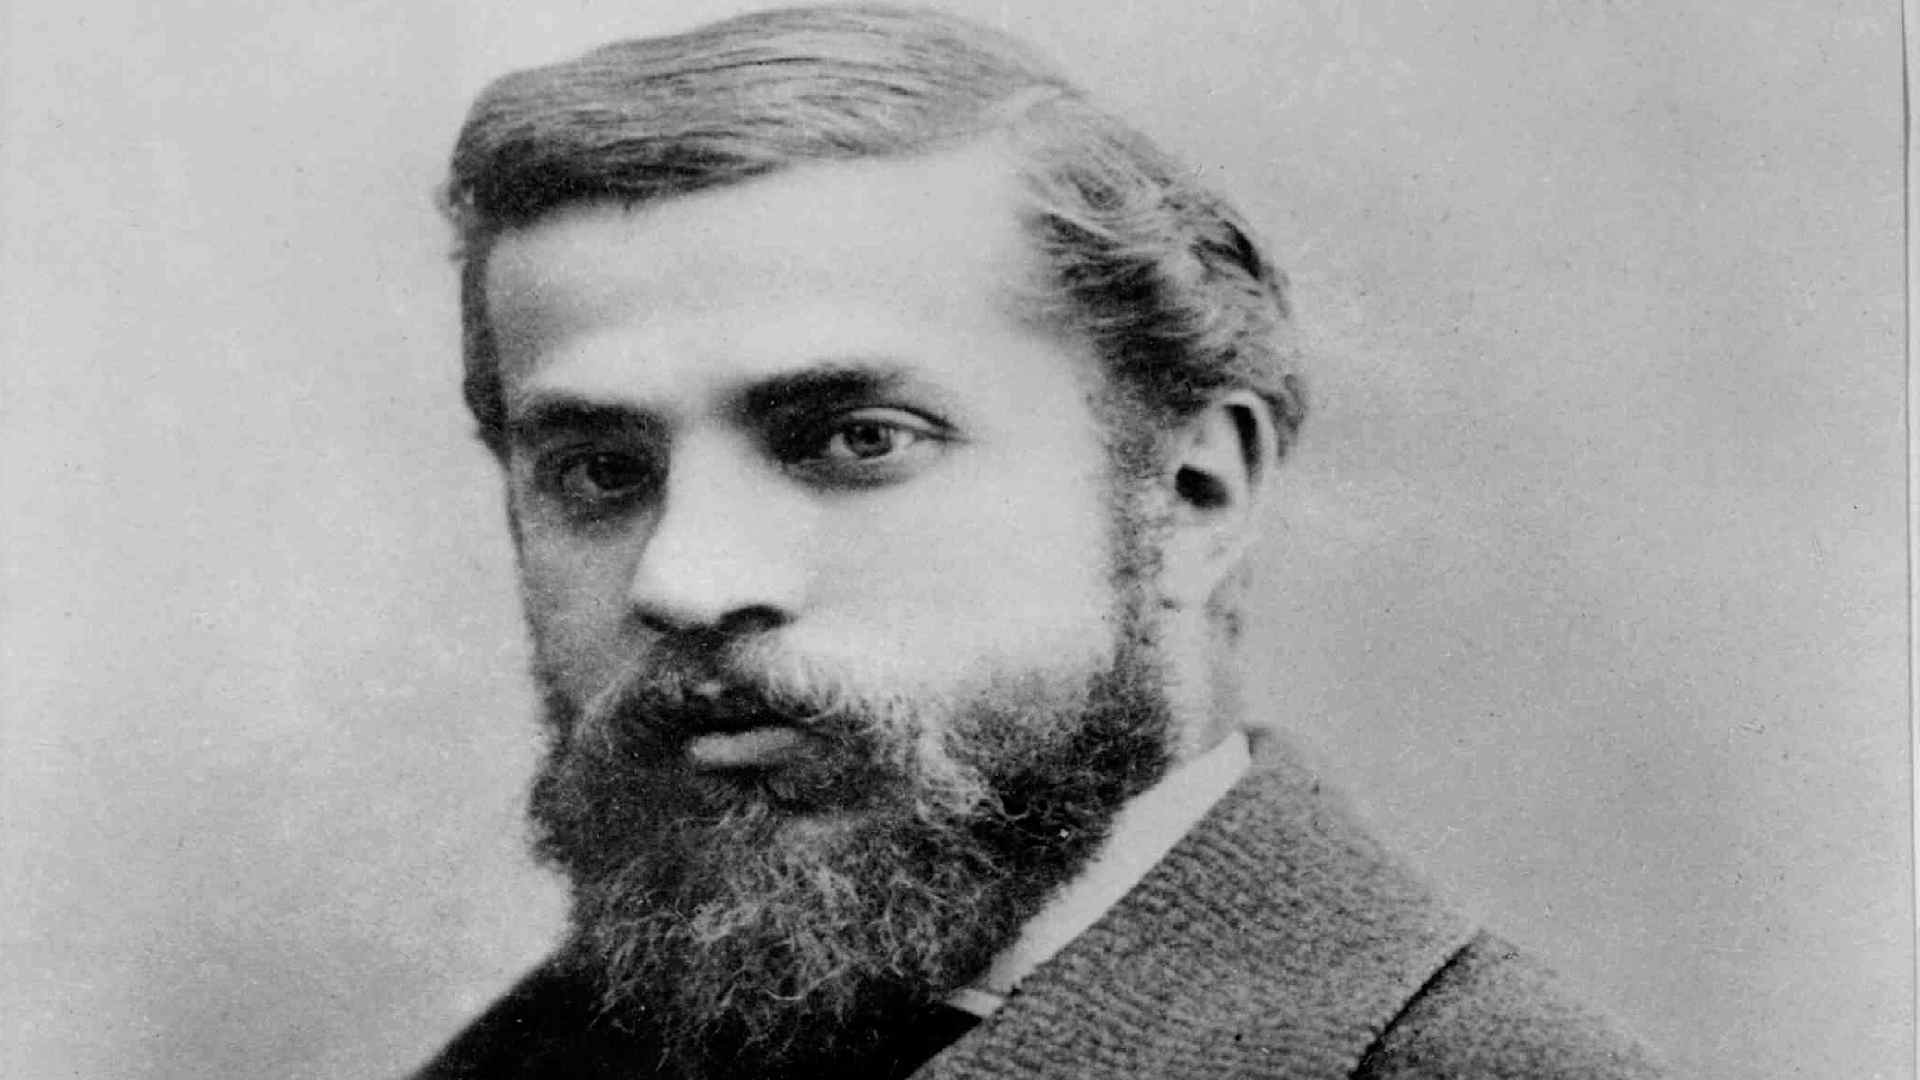 You are currently viewing Anthony (Antoni) Gaudi Biography in Short